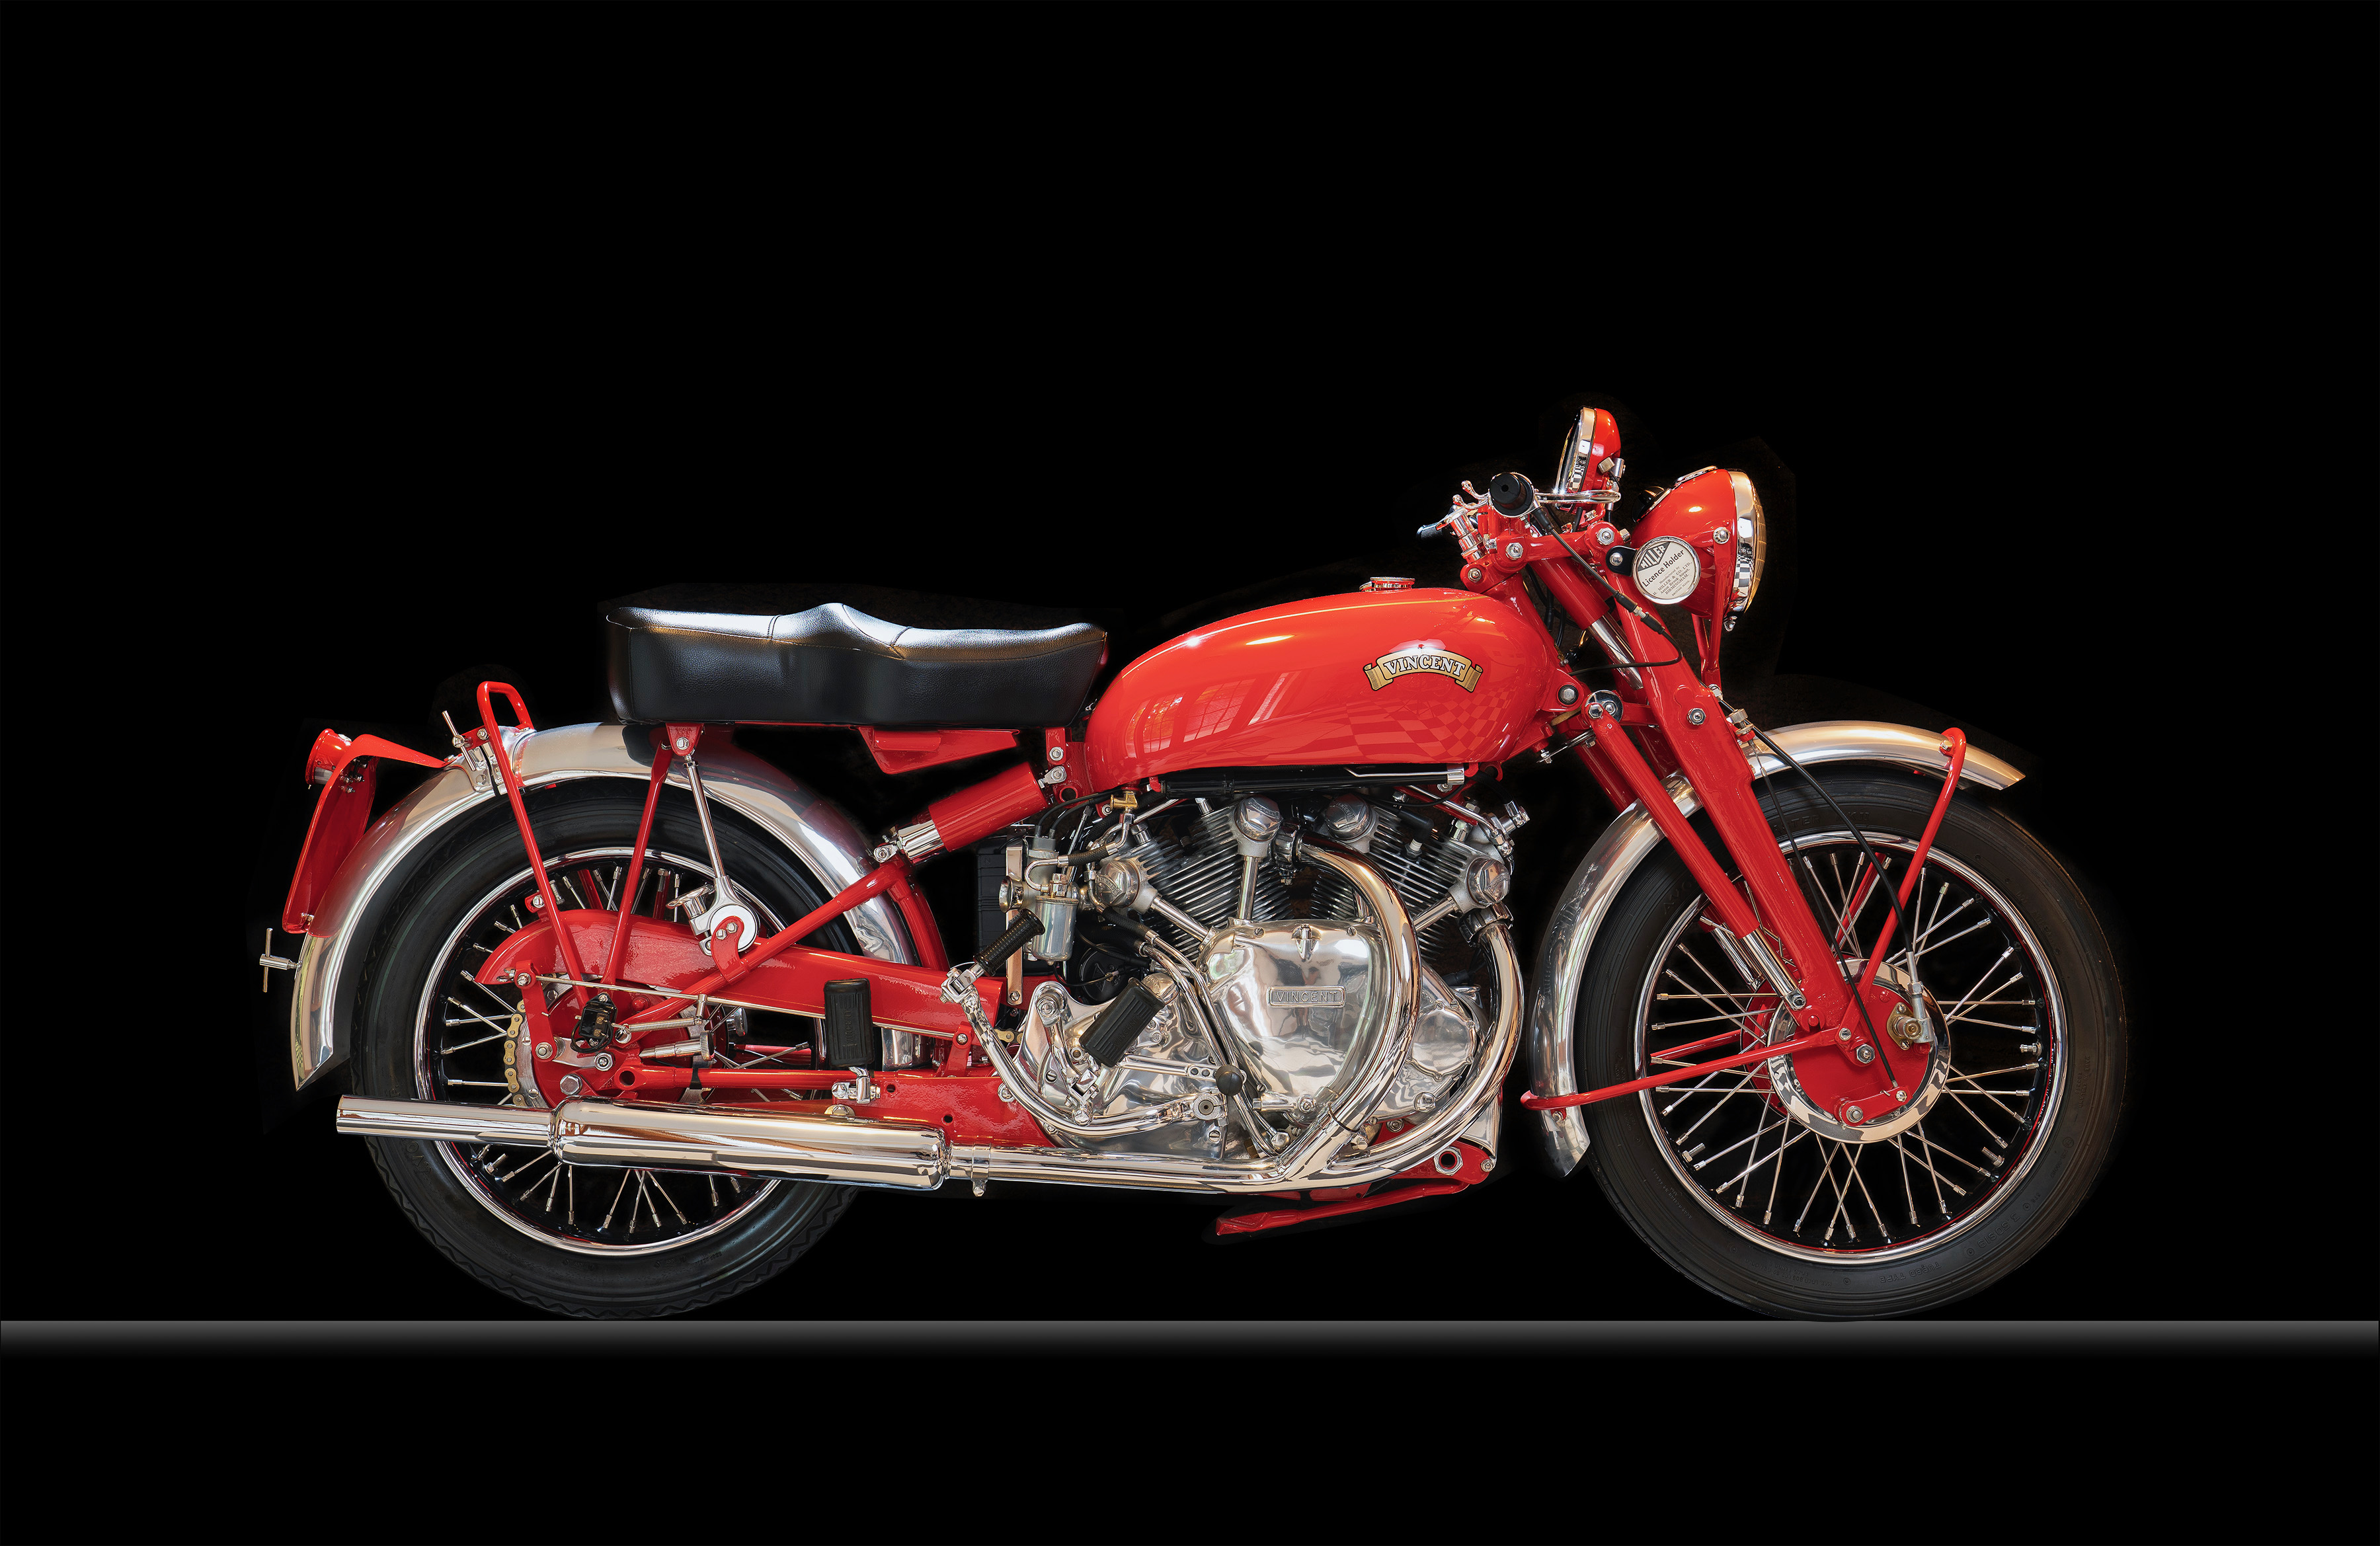 Motorcycles, Time Machines III: The Age of Elegance, ClassicCars.com Journal